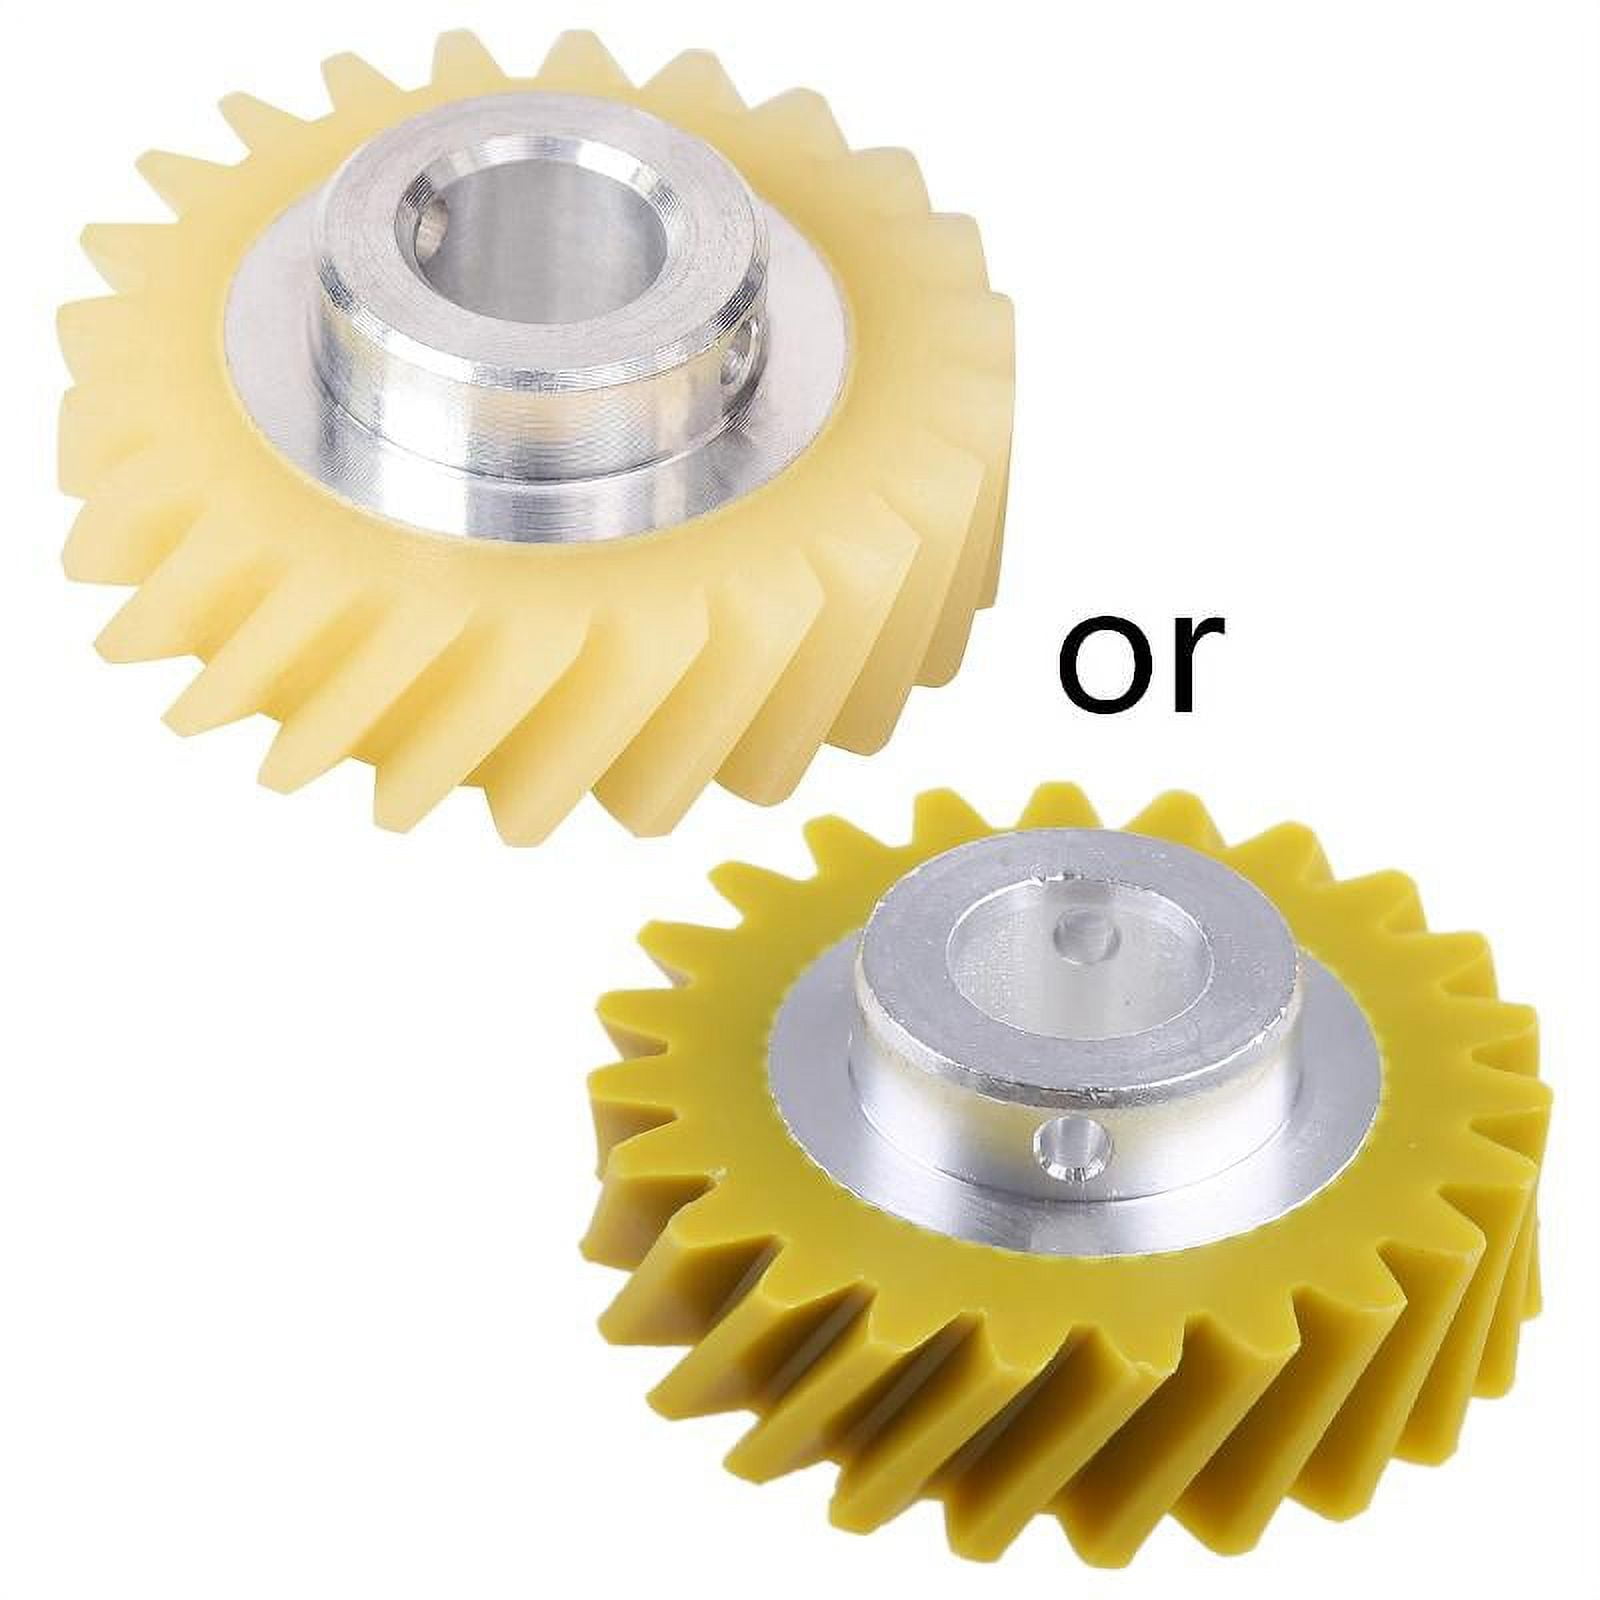 HQRP 88777257232 4-Pack Mixer Worm Gear compatible with KitchenAid